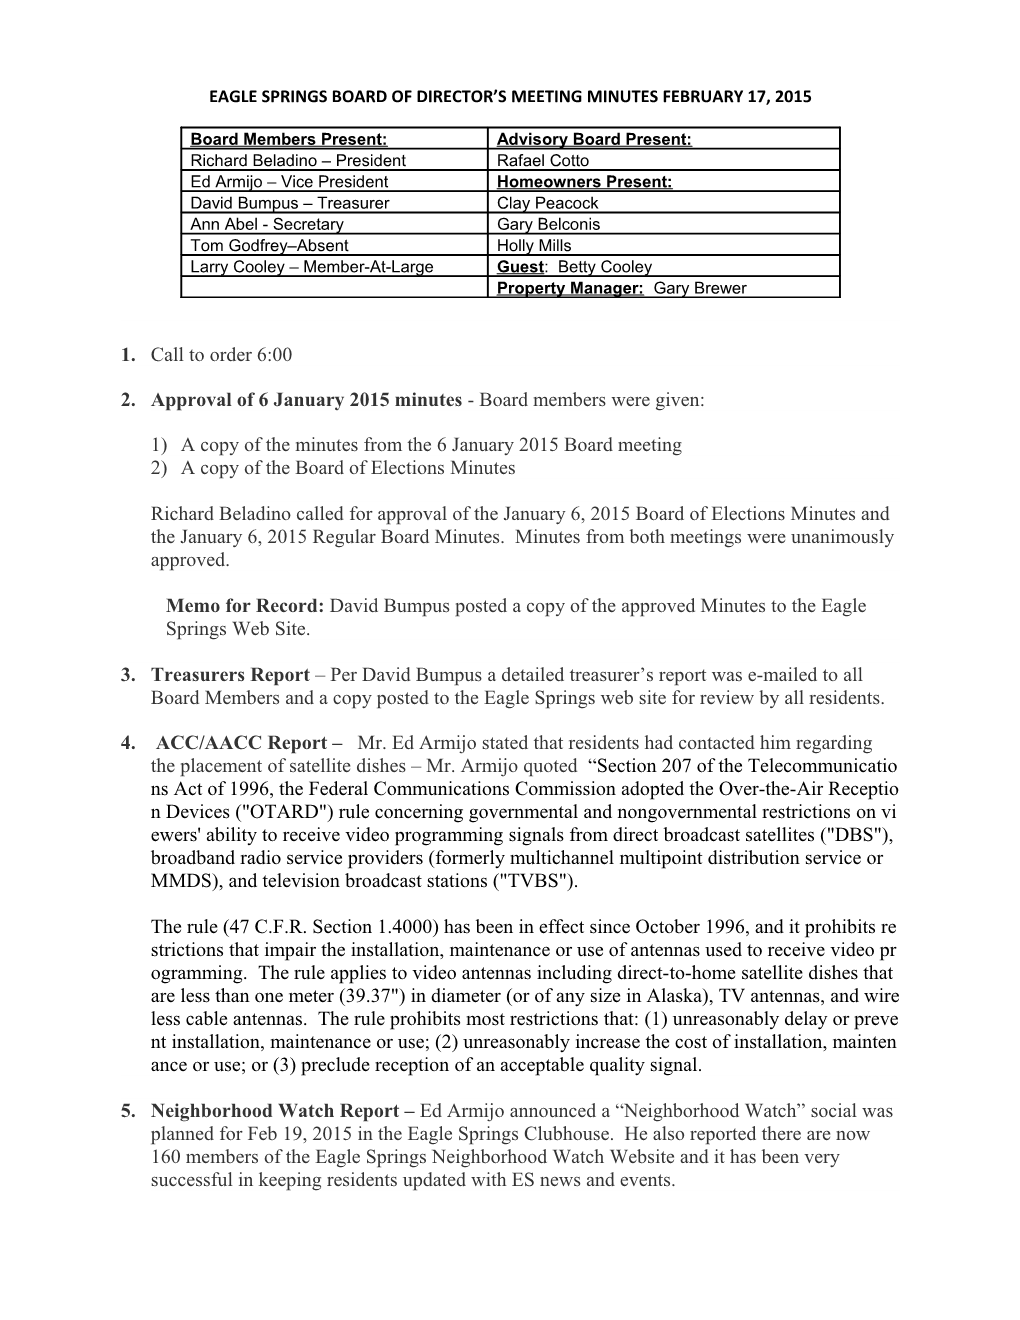 Eagle Springs Board of Director S Meeting Minutes Feb 10, 2014